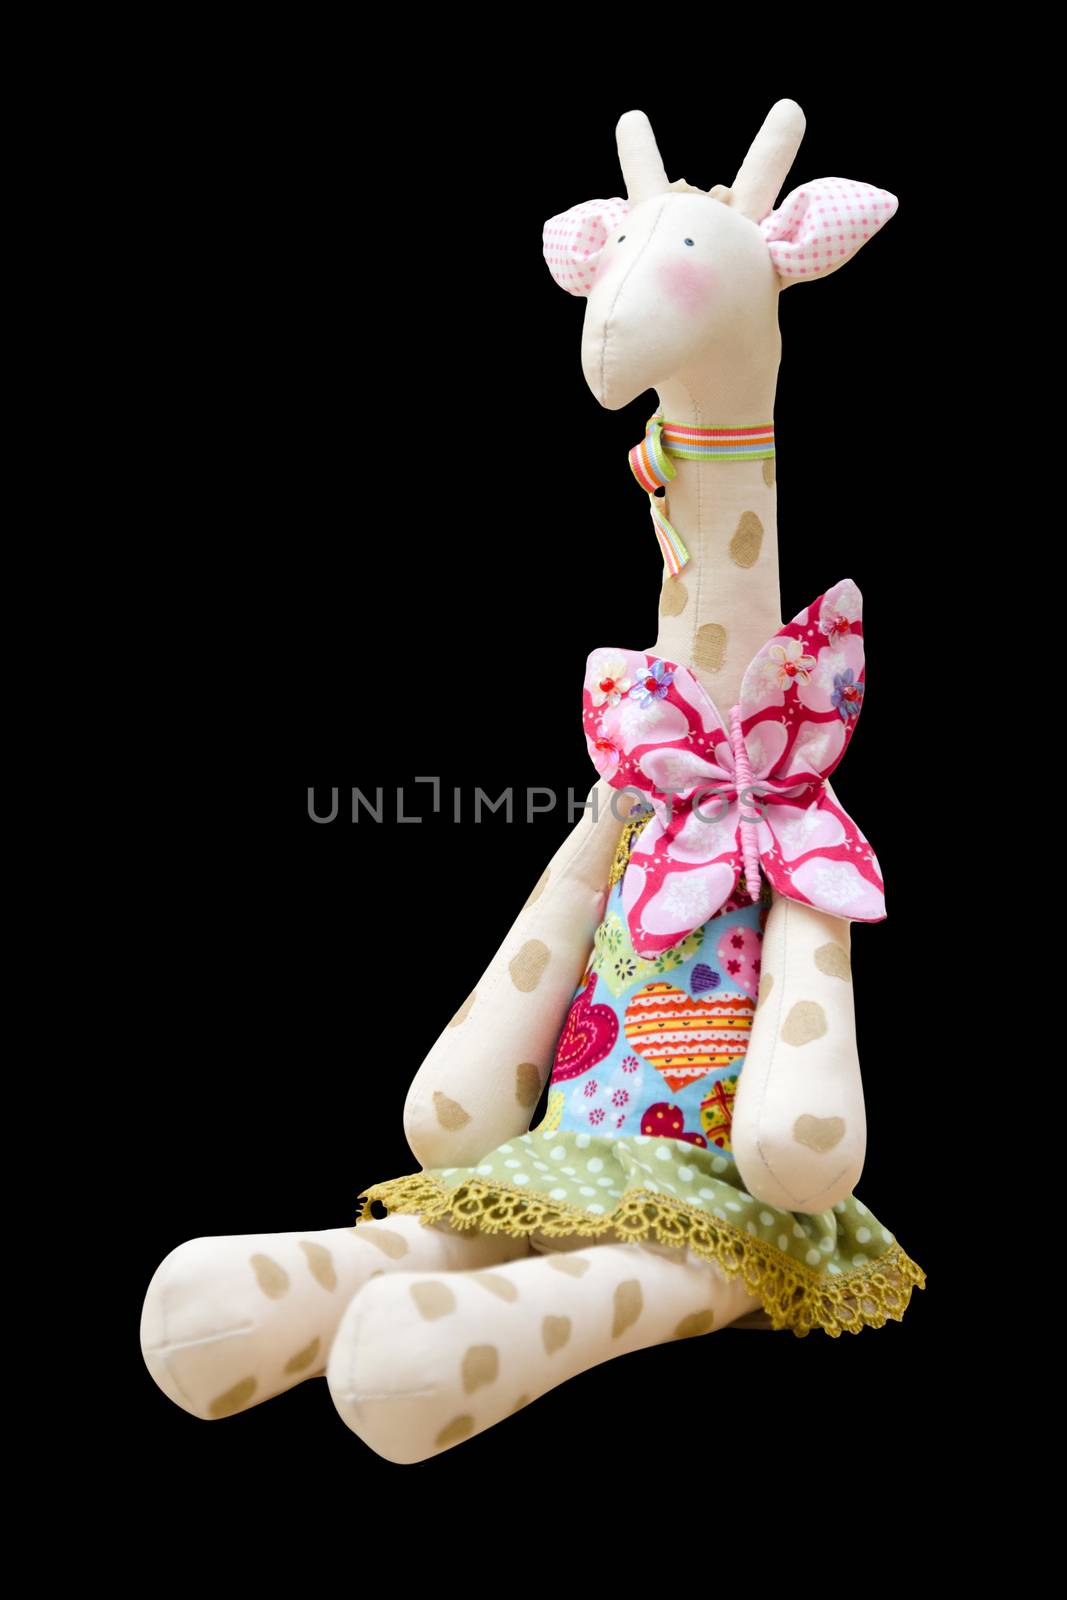 The Hand made soft toy giraffe isolated in a dress sitting